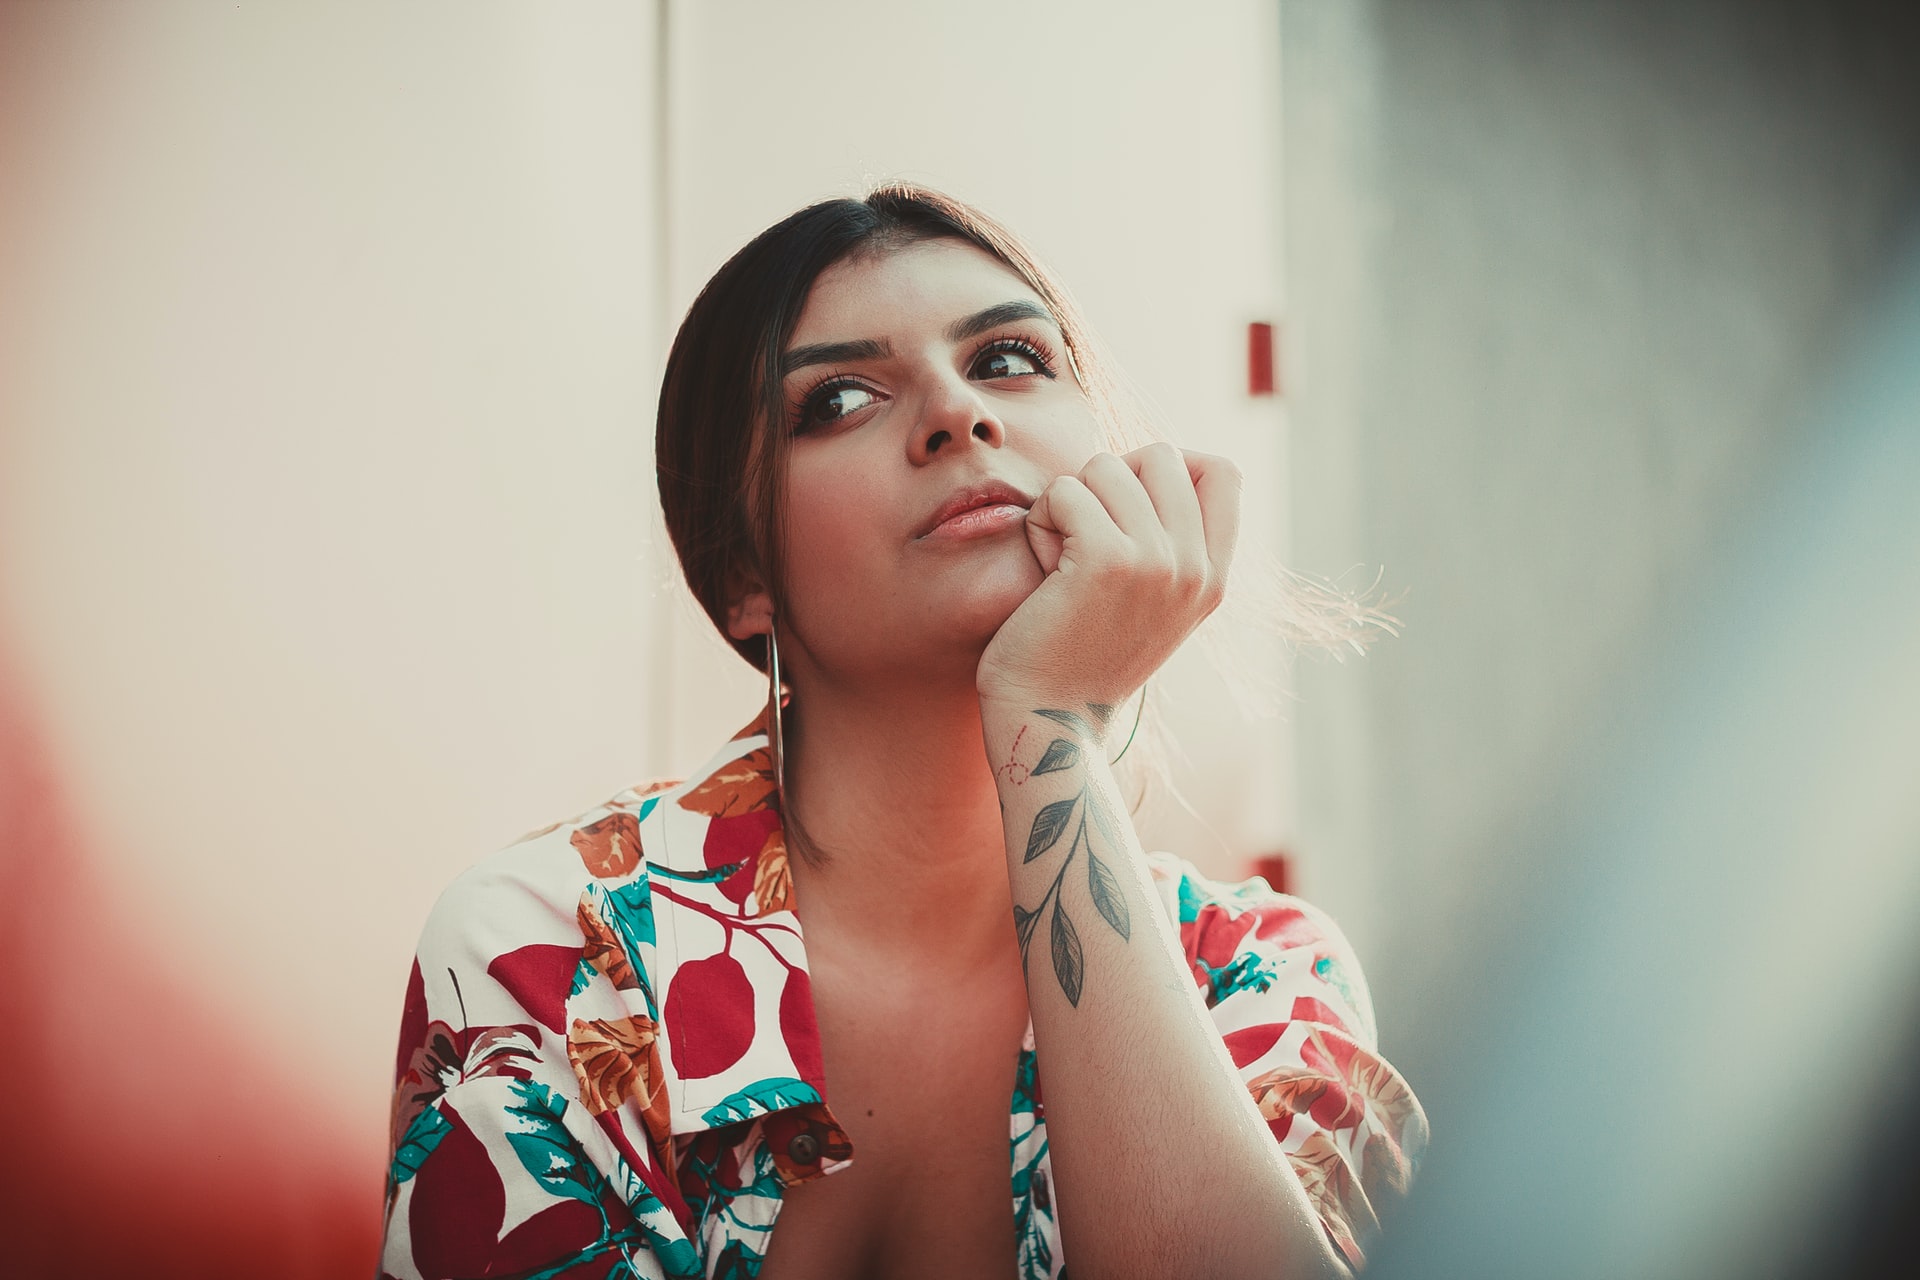 woman rests chin on her hand, looking off-camera